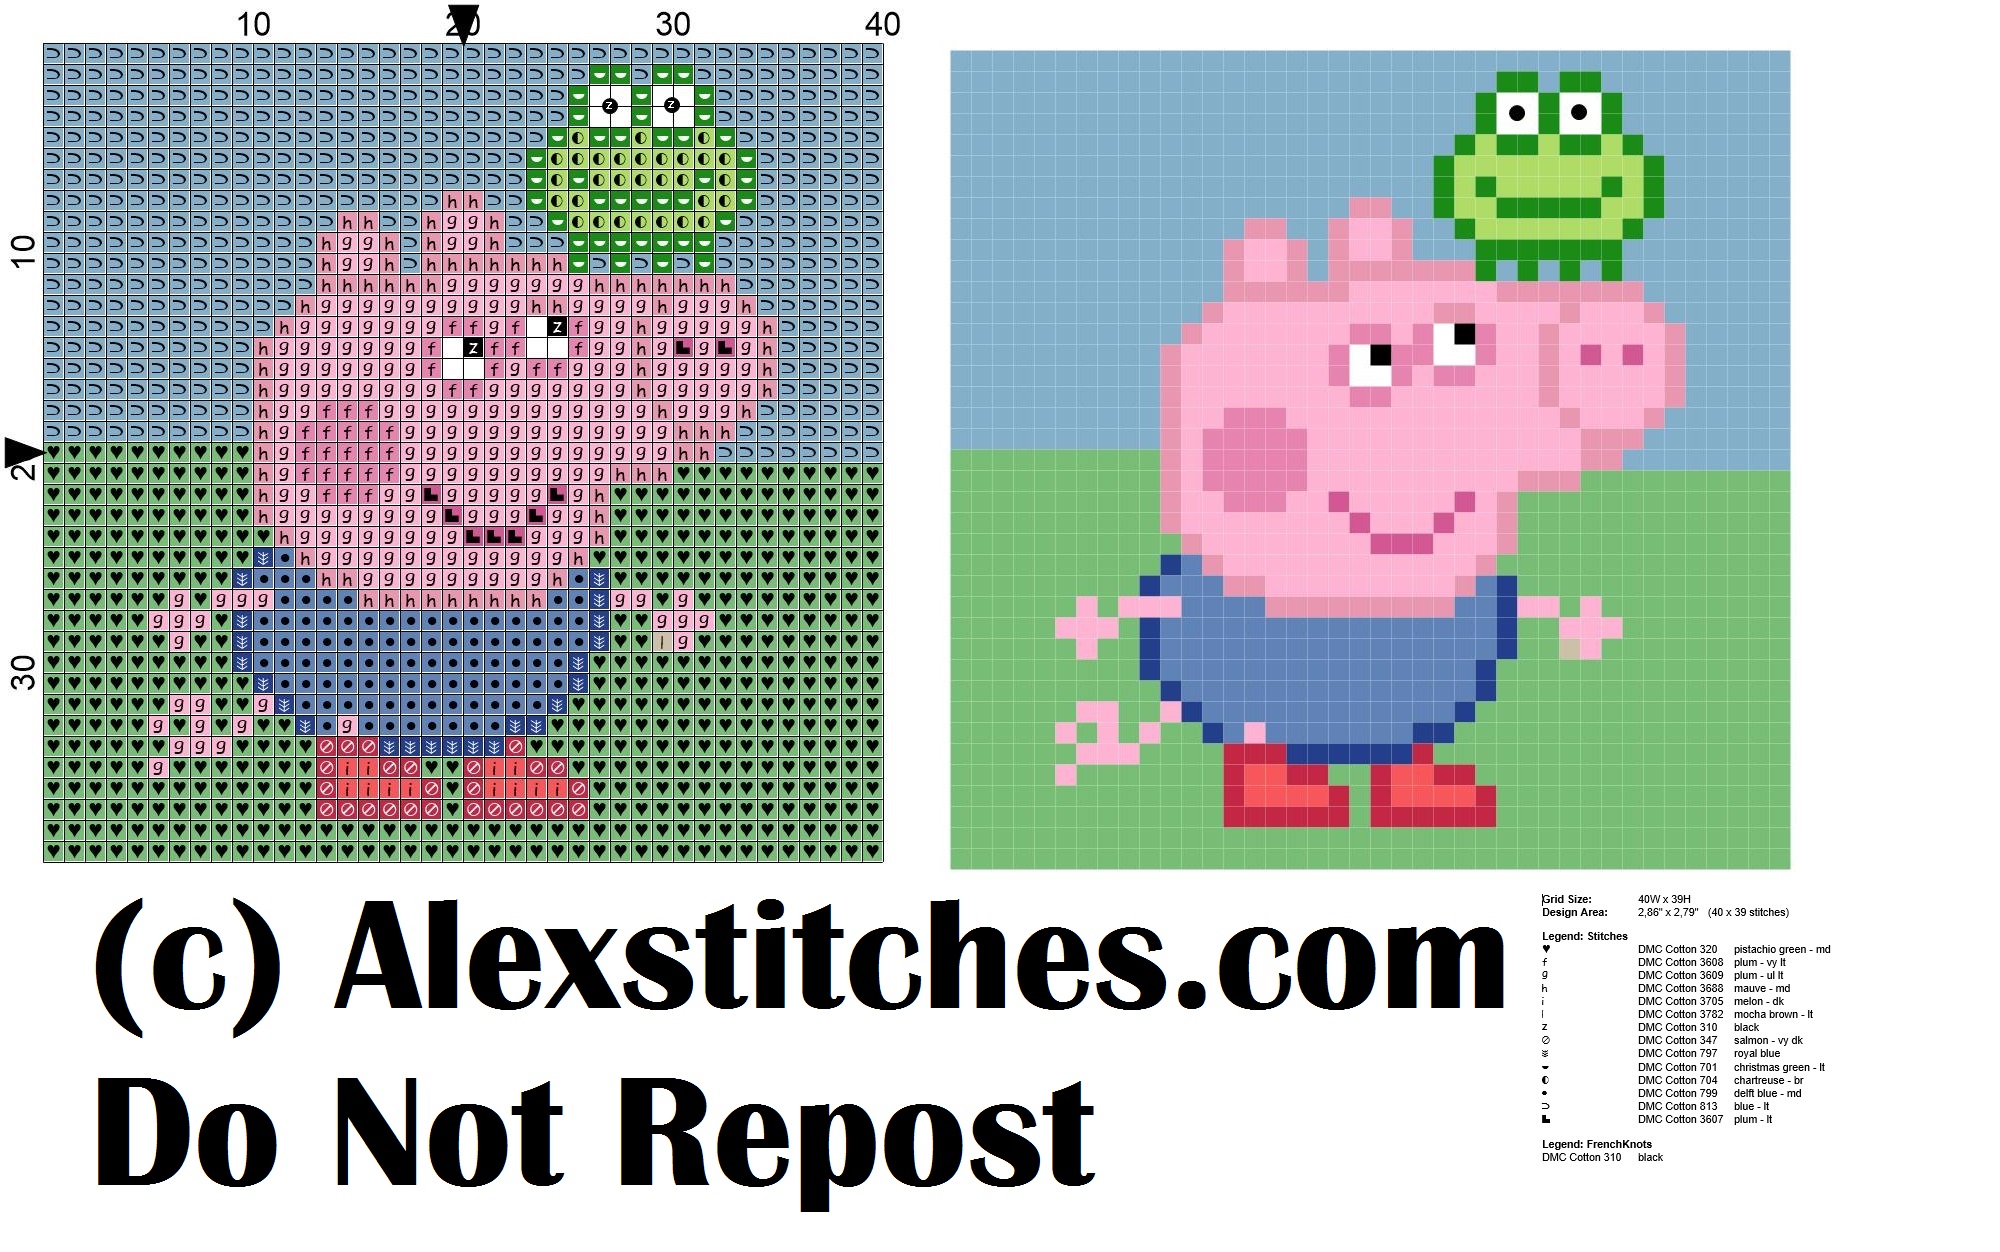 george peppa pig' s brother with a frog cross stitch pattern